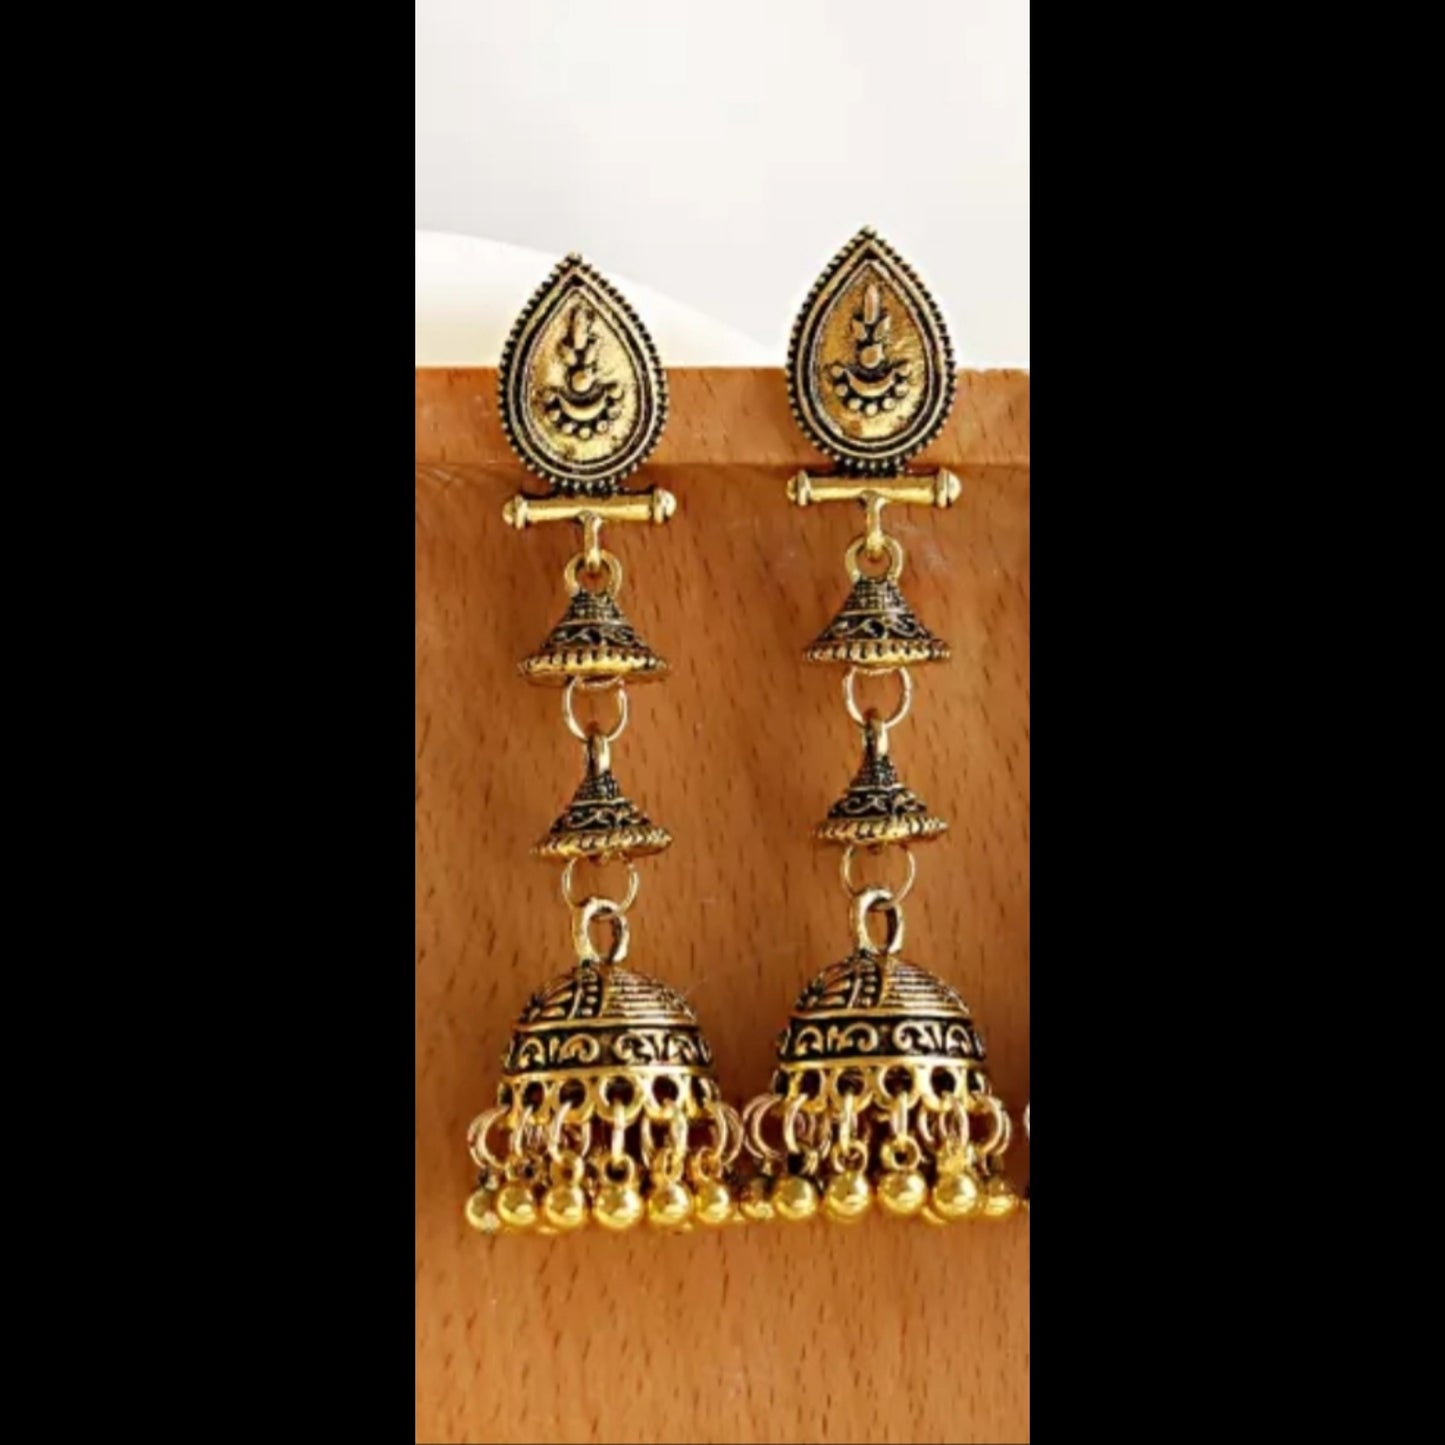 Vintage Earring Collection